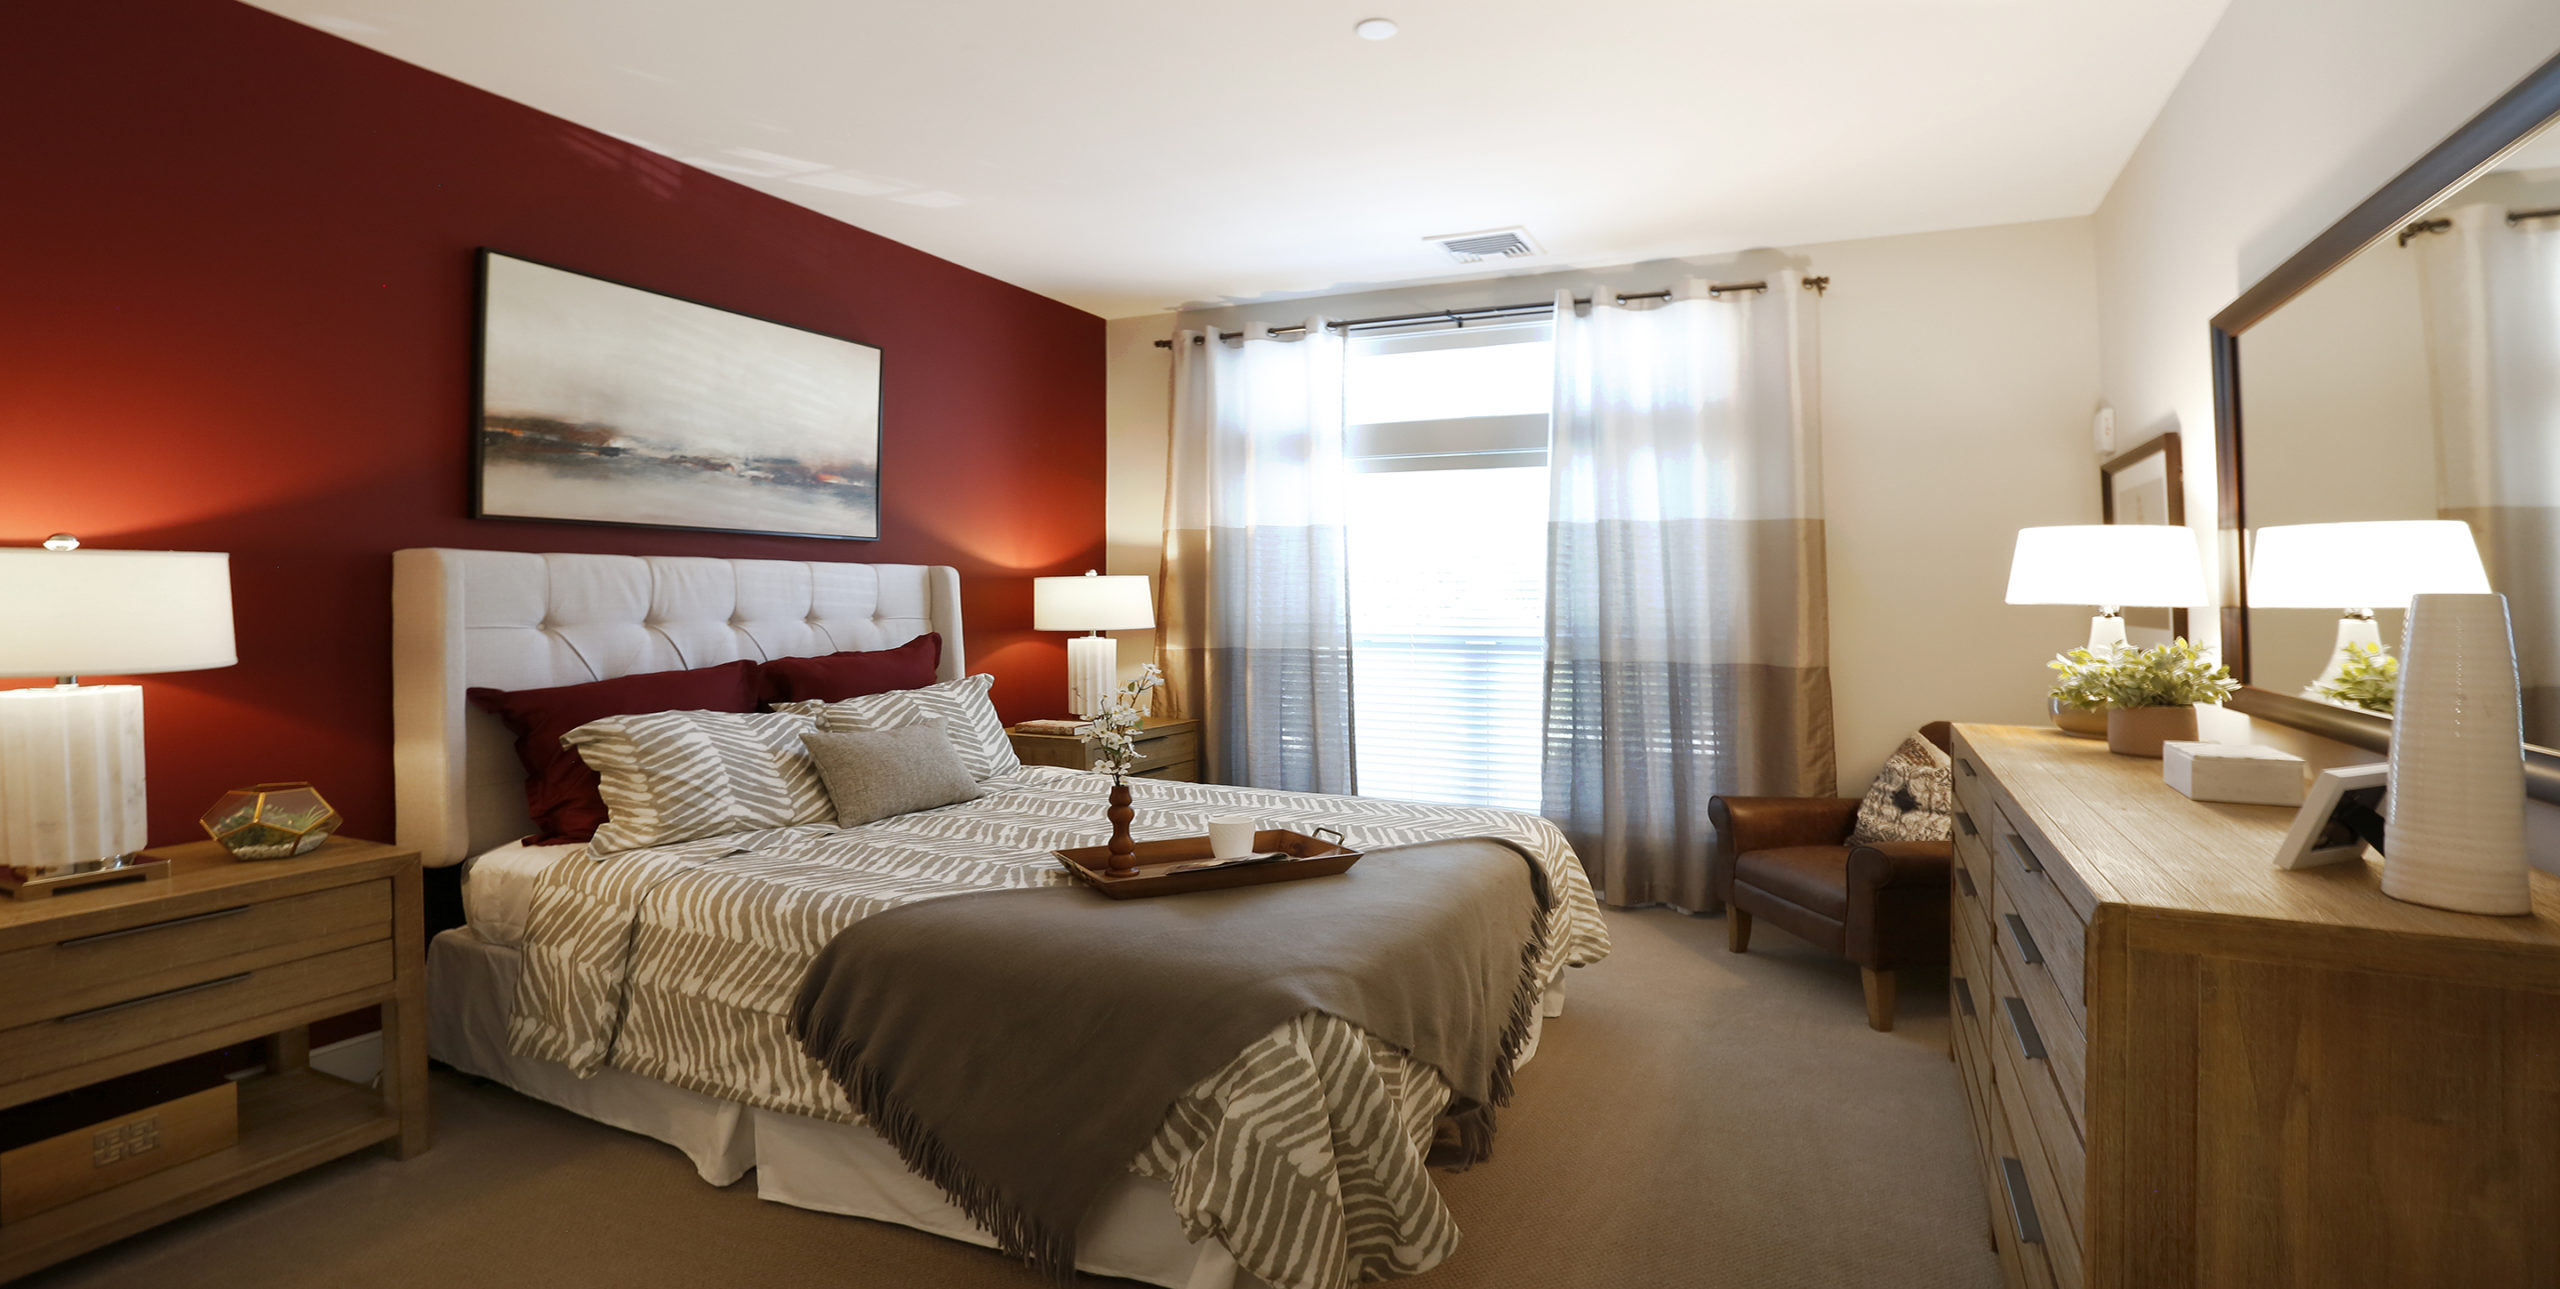 Queen-sized bed in a bedroom at Brightview Senior Living in Sayville, NY